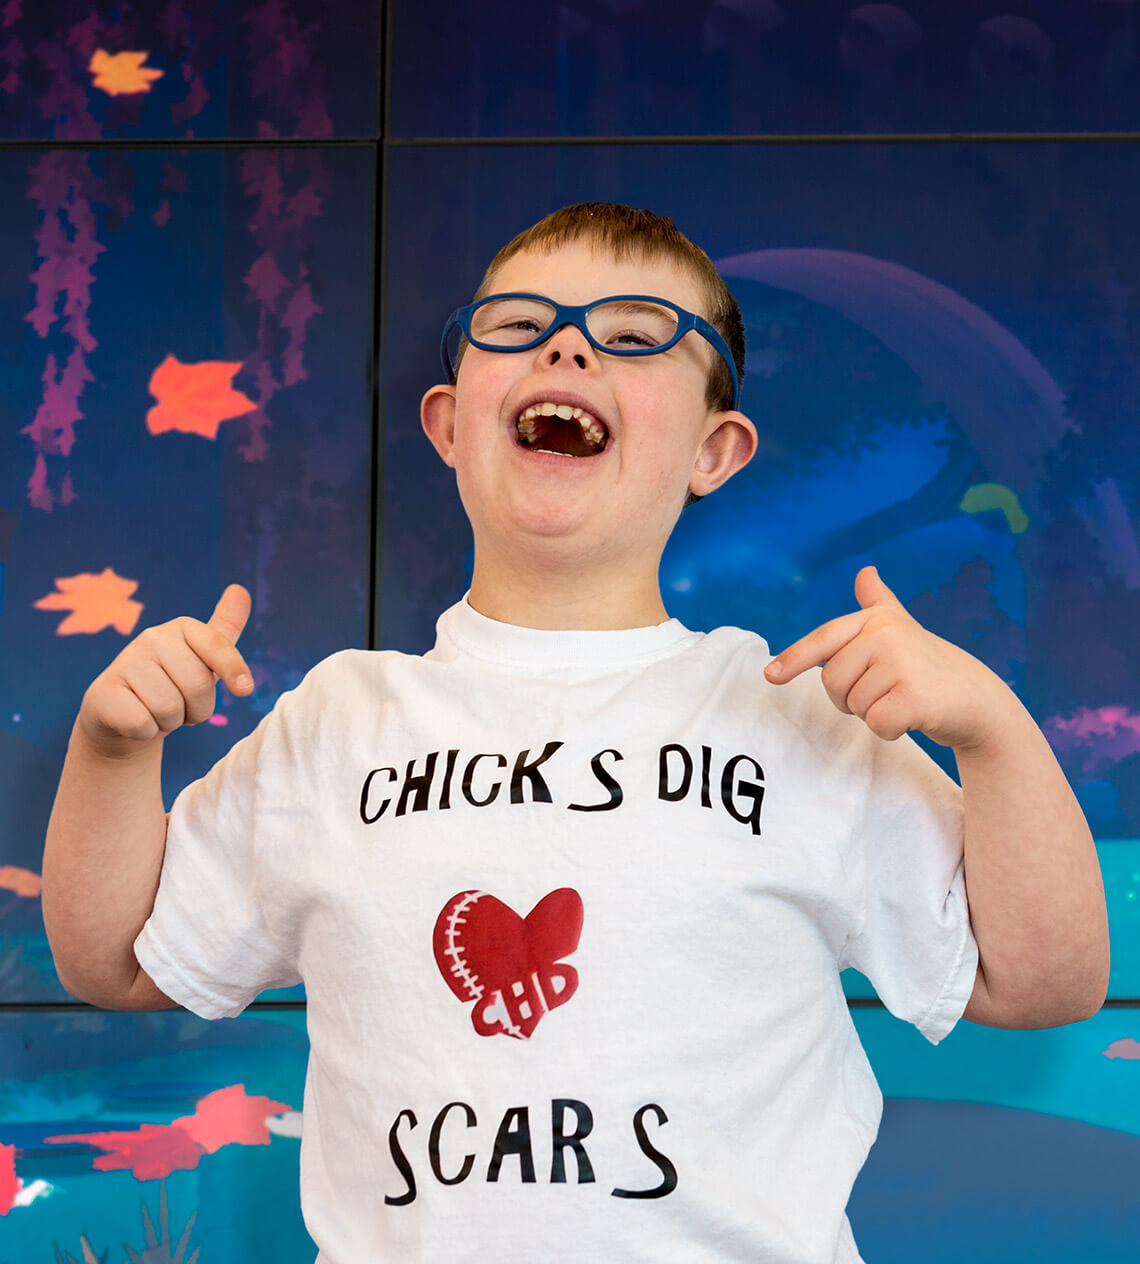 Pediatric cardiology patient Jacob Worley dances in front of a wall.